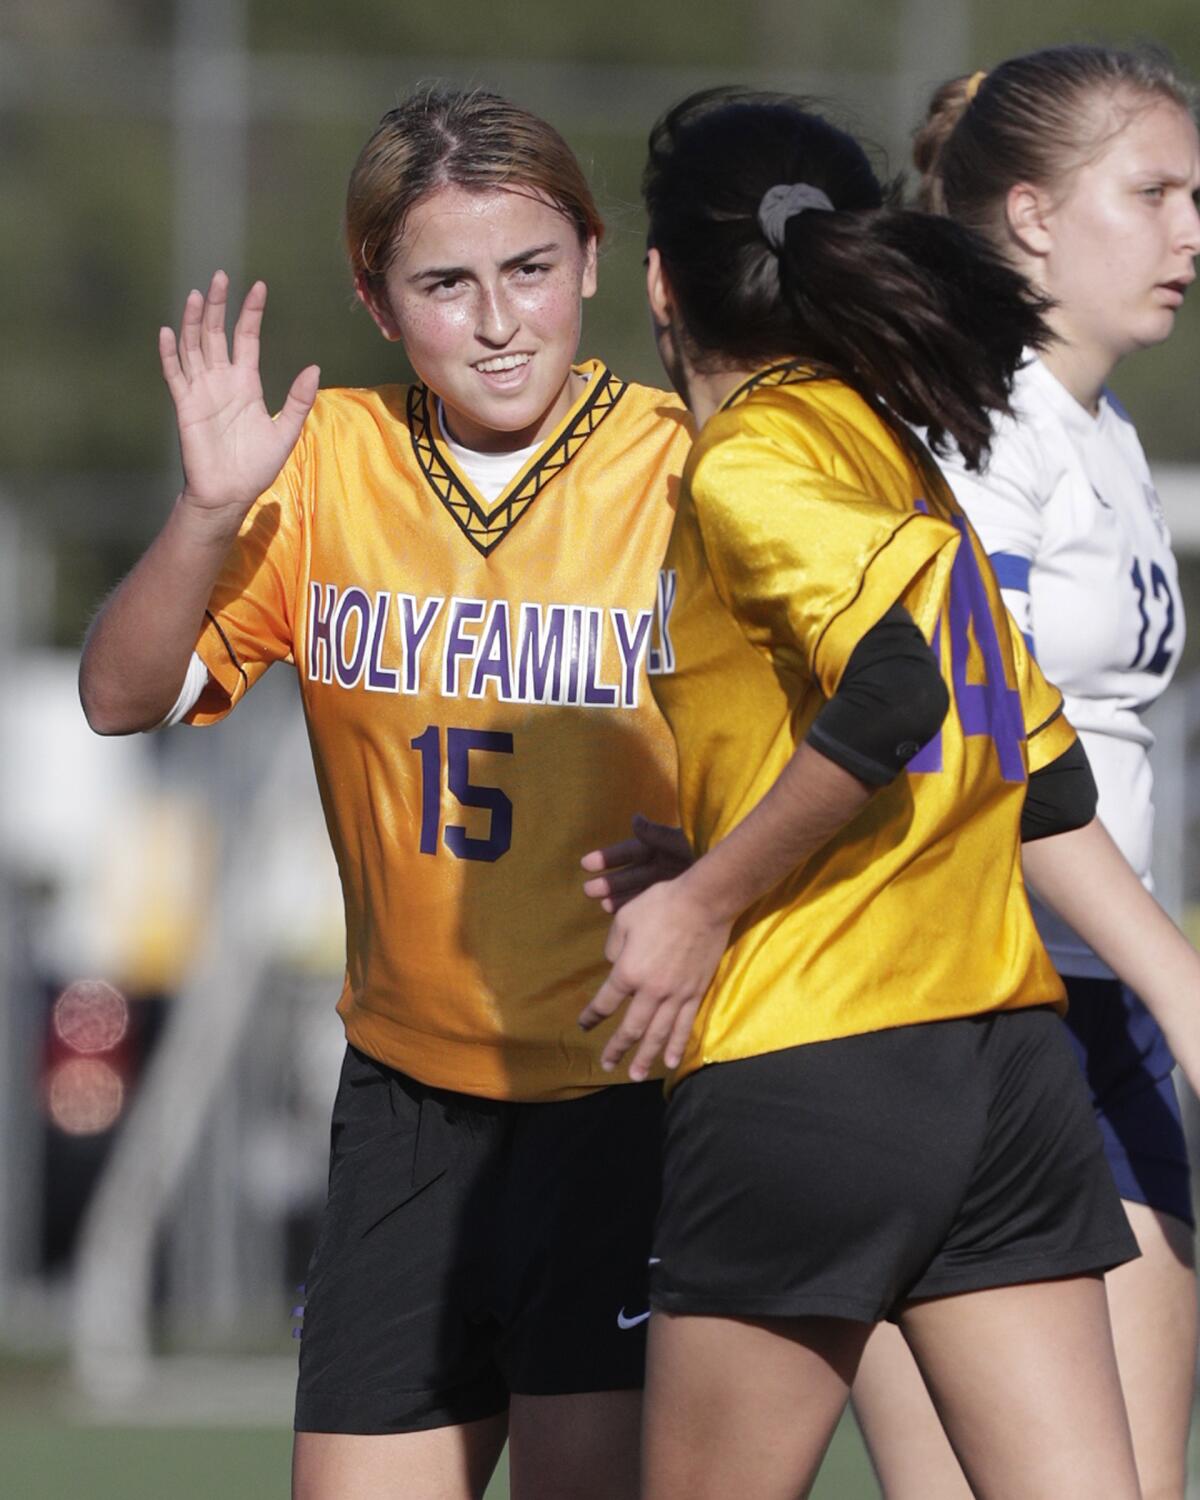 Holy Family's Brianna Cindrich is congratulated by teammate Maya Devora after scoring in a Horizon League girls' soccer game at the Glendale Sports Complex in Glendale on Monday, January 27, 2020.